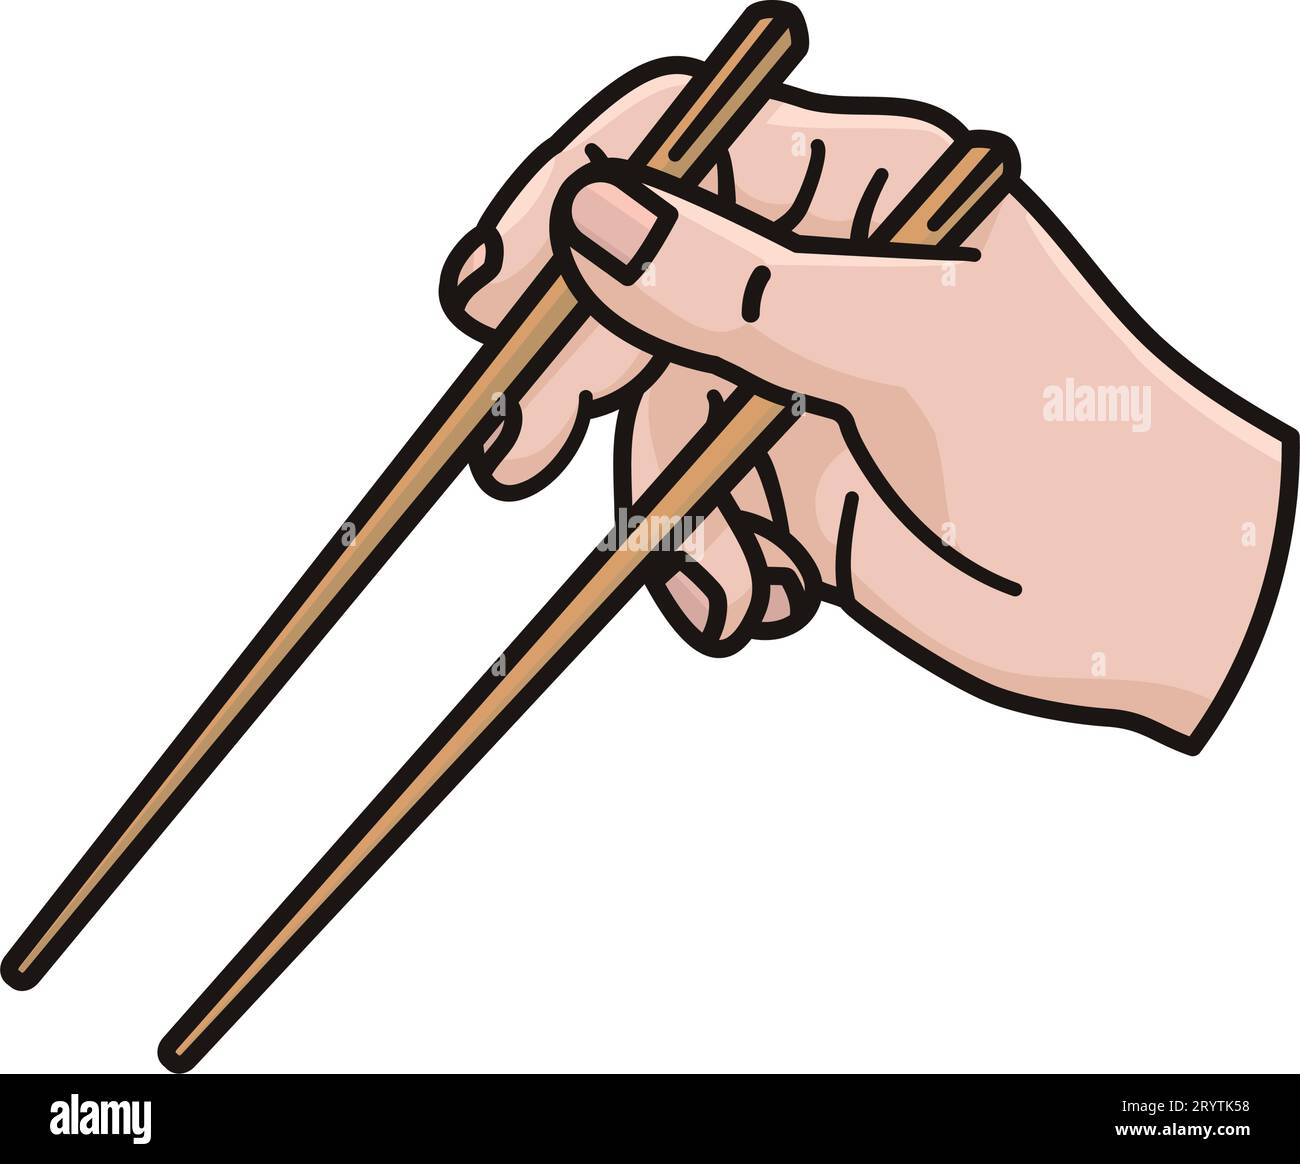 Human hand using chopsticks isolated vector illustration for National Chopsticks Day on February 6 Stock Vector